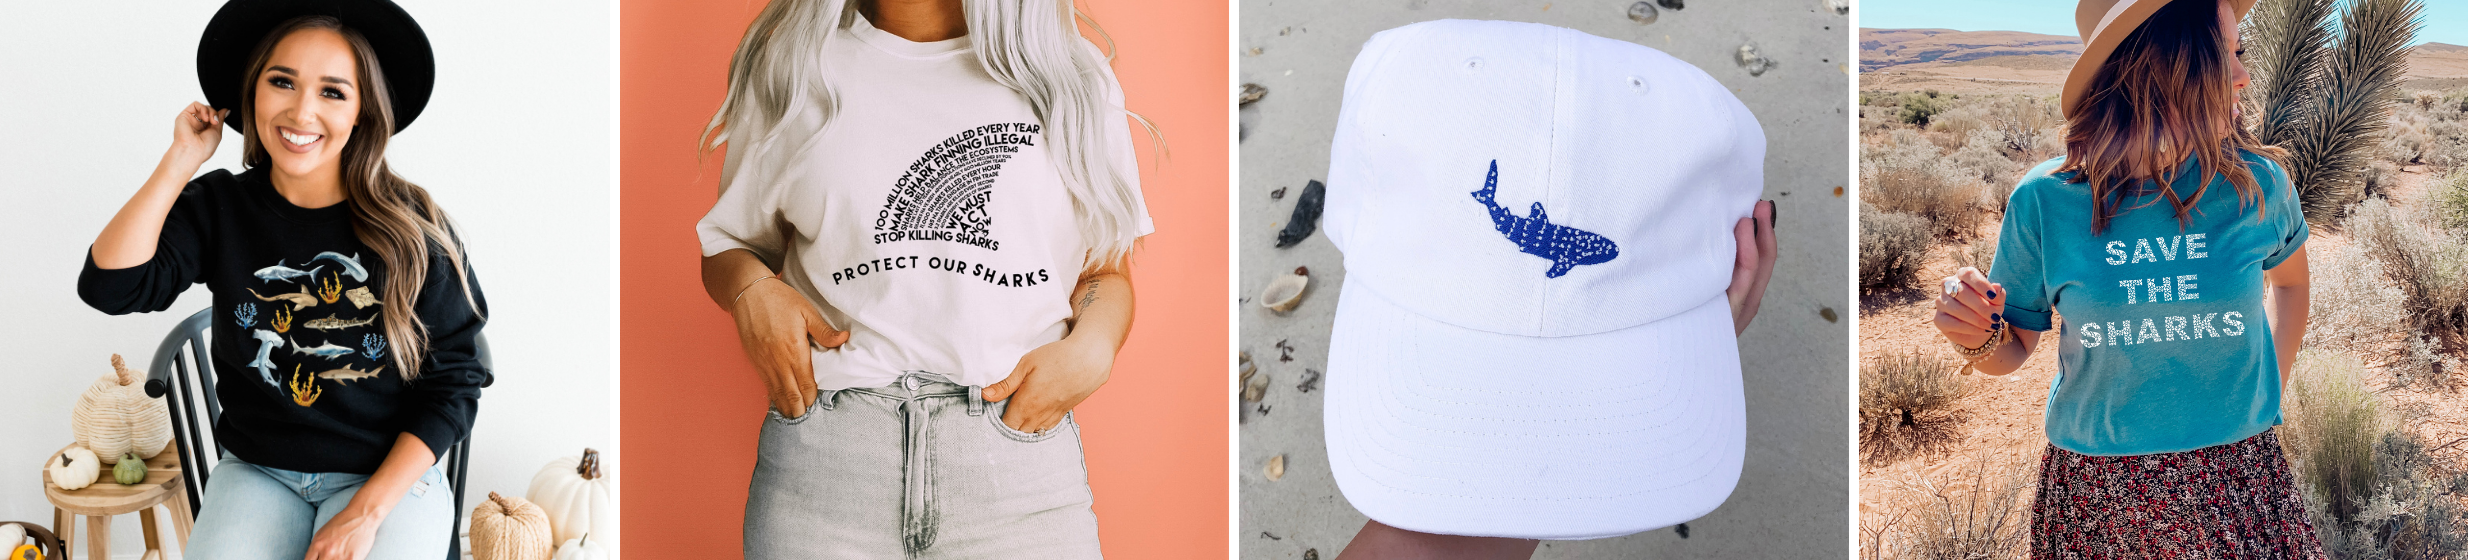 collage of chinesemandaringarden products - woman wearing shirt with sharks, woman wearing shark fin tshirt, whale shark cotton cap, and save the sharks tshirt